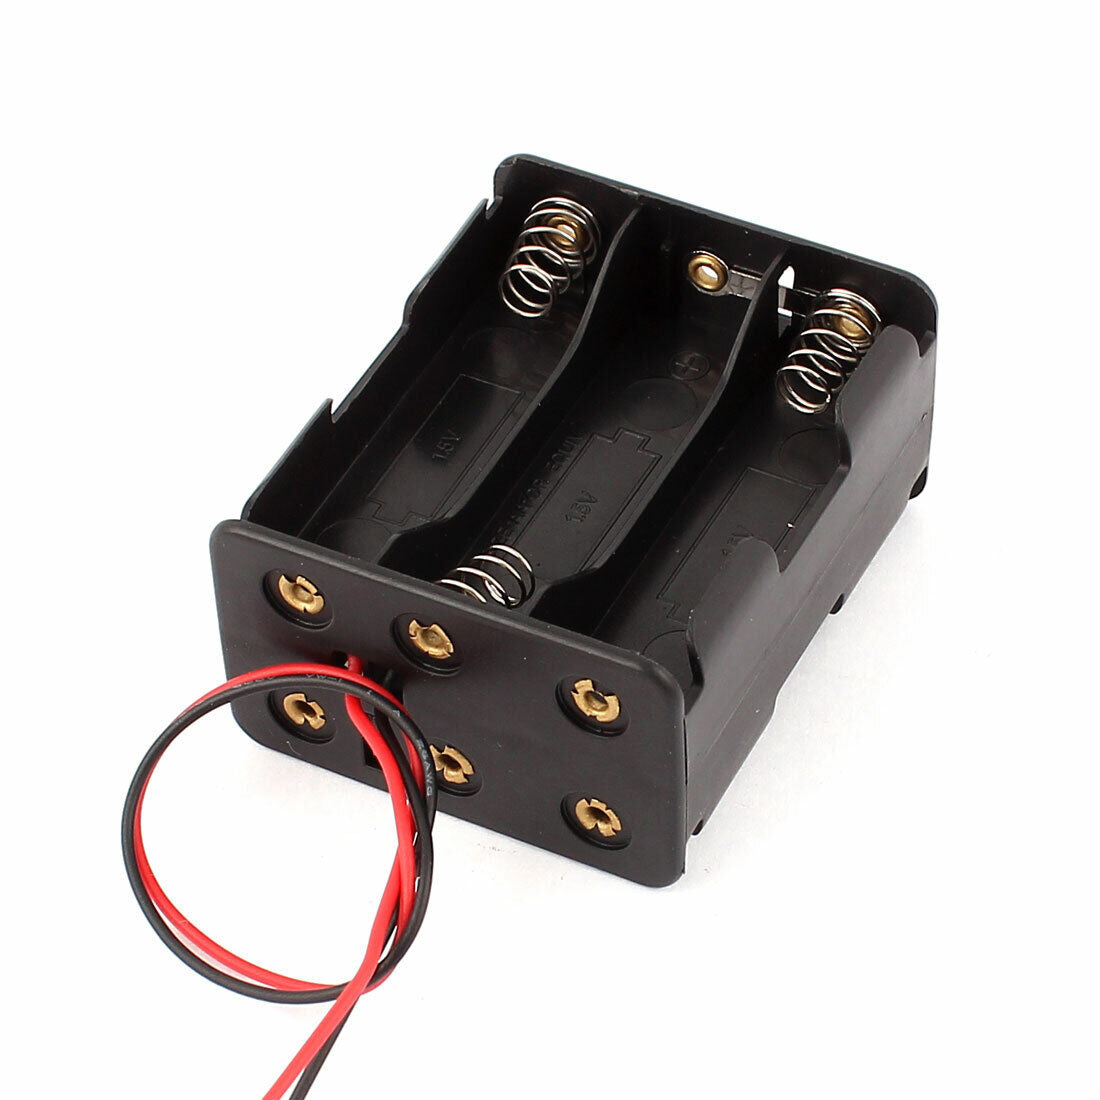 6 x AA Battery Holder Box (Back-to-Back)